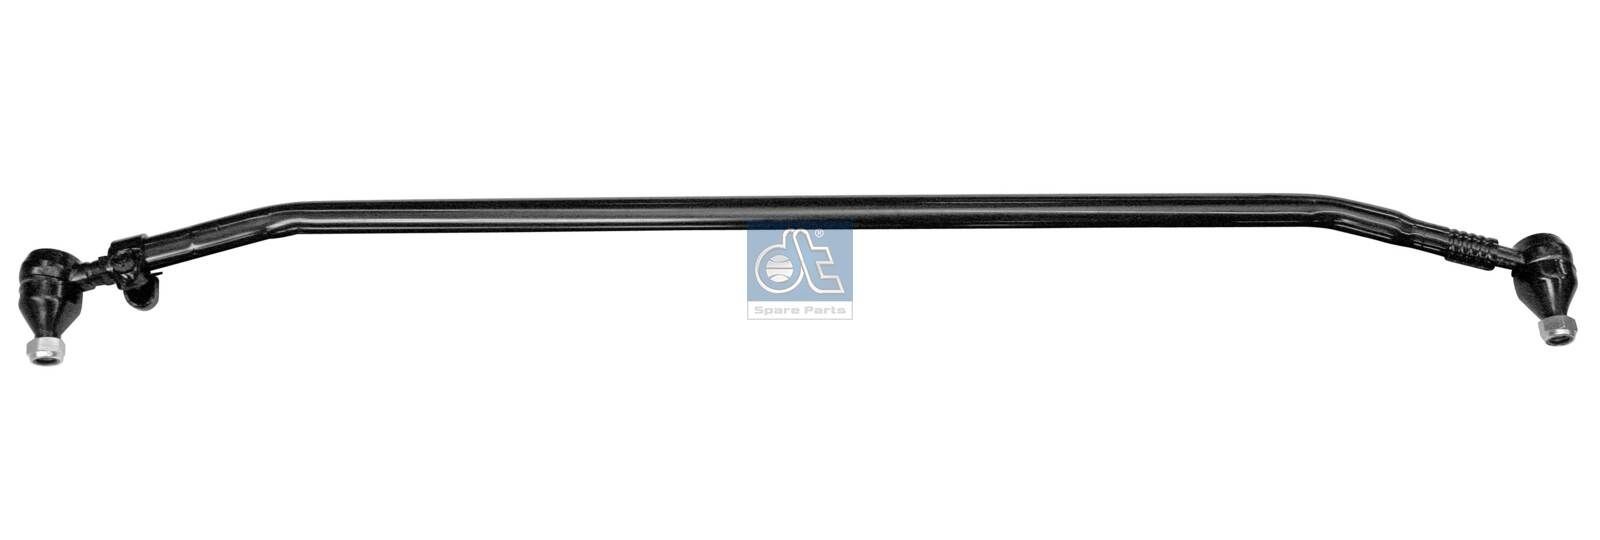 DT Spare Parts 3.63004 Rod Assembly 81.46711.6920